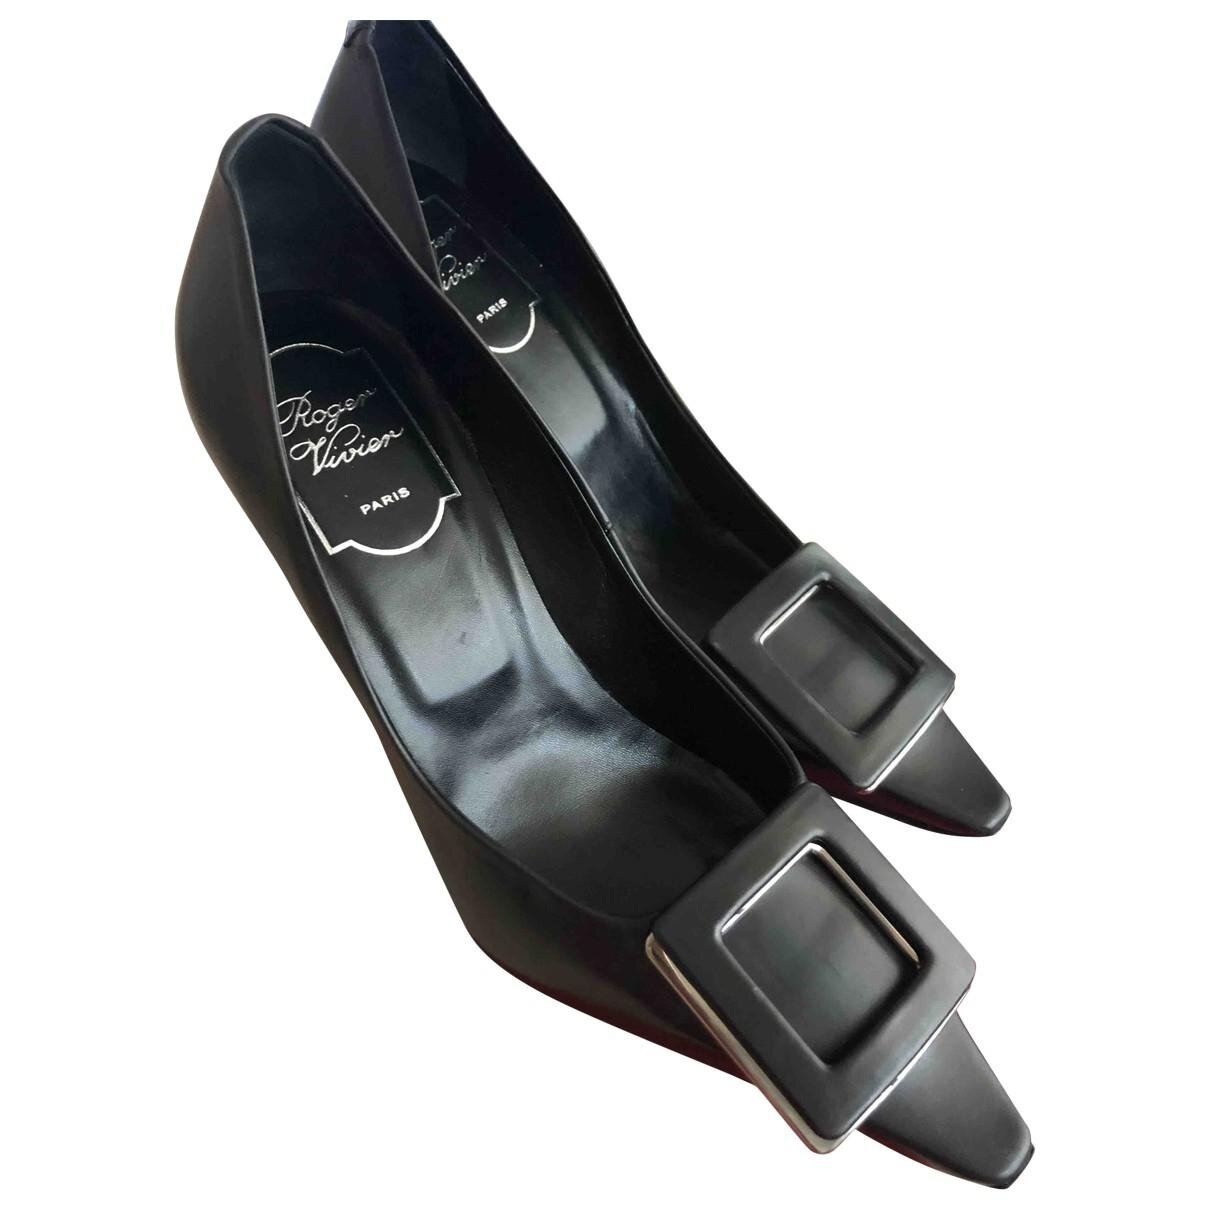 Roger Vivier Trompette Pumps in Black Patent Leather with Black Buckle.jpg